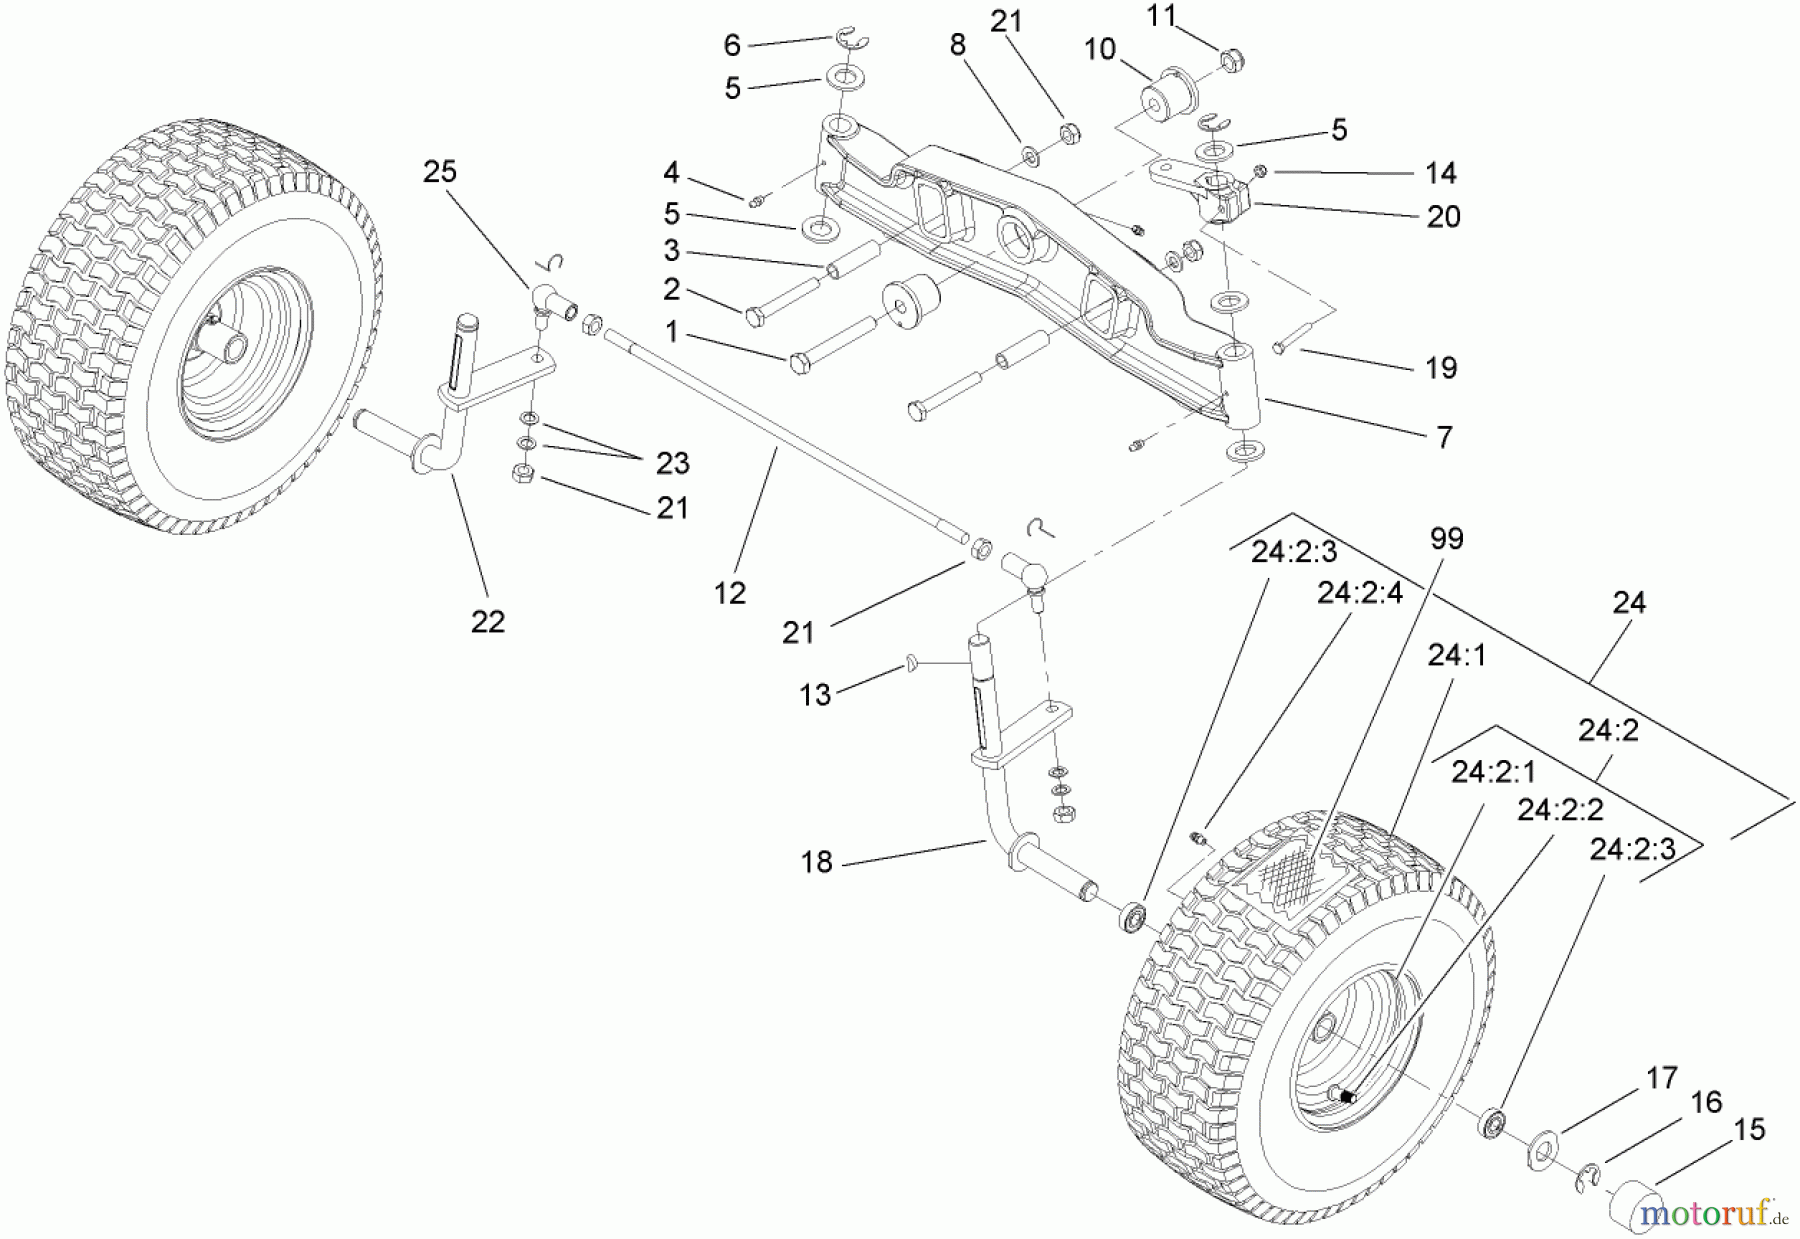  Toro Neu Mowers, Lawn & Garden Tractor Seite 1 74591 (DH 220) - Toro DH 220 Lawn Tractor, 2006 (260000001-260999999) FRONT AXLE ASSEMBLY